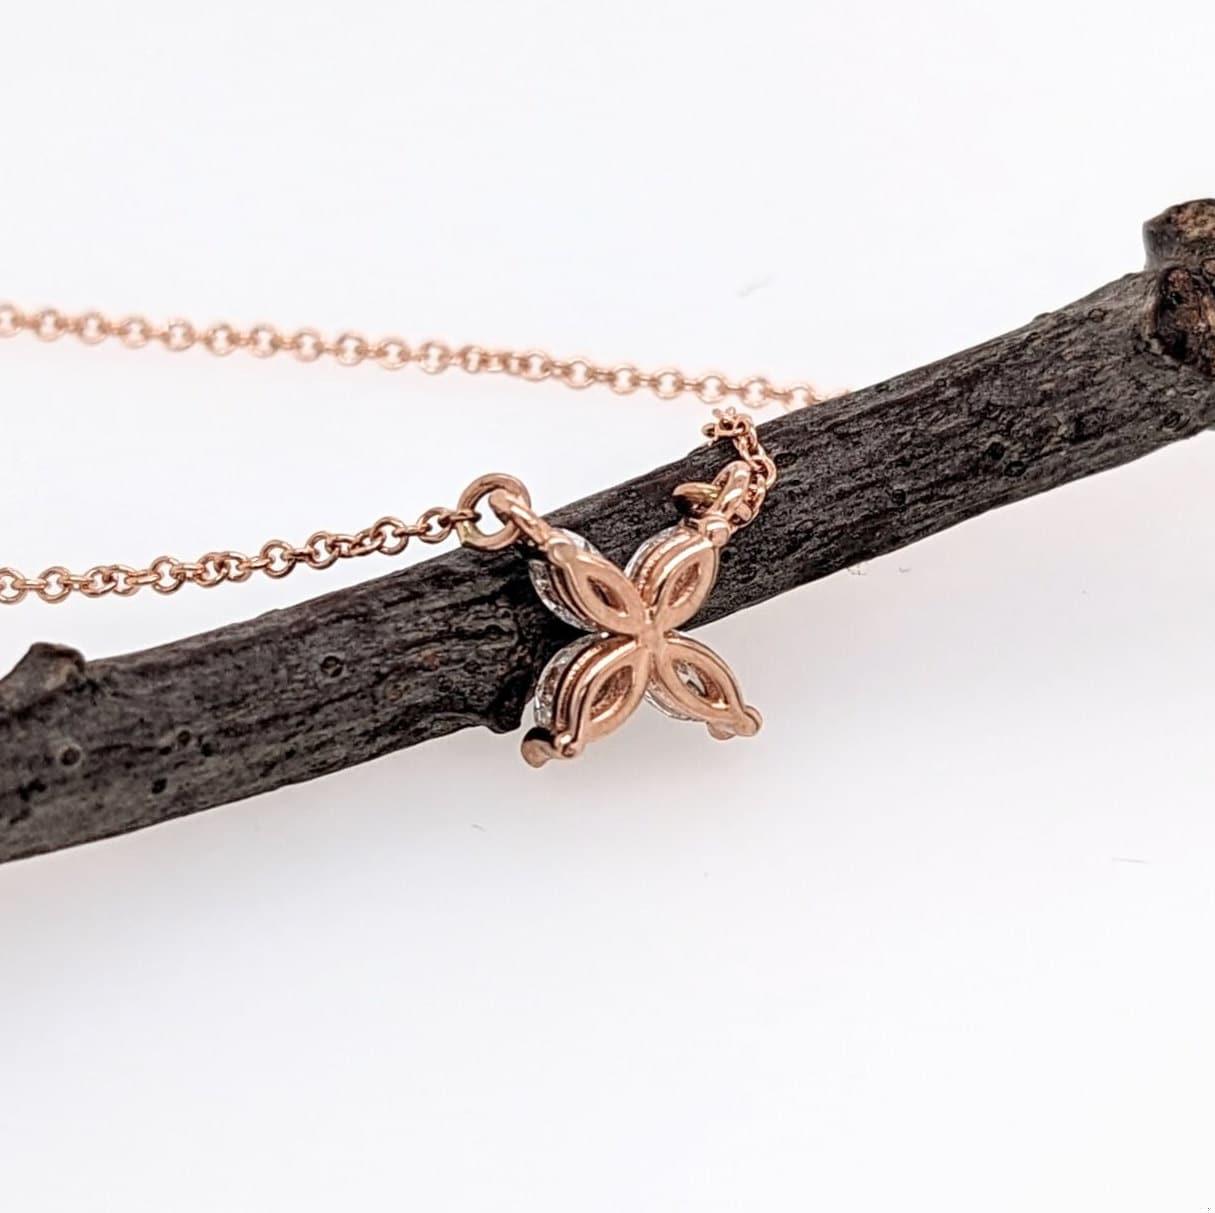 Cute Flower Shaped Pendant in Solid 14k Rose Gold with Natural Diamonds